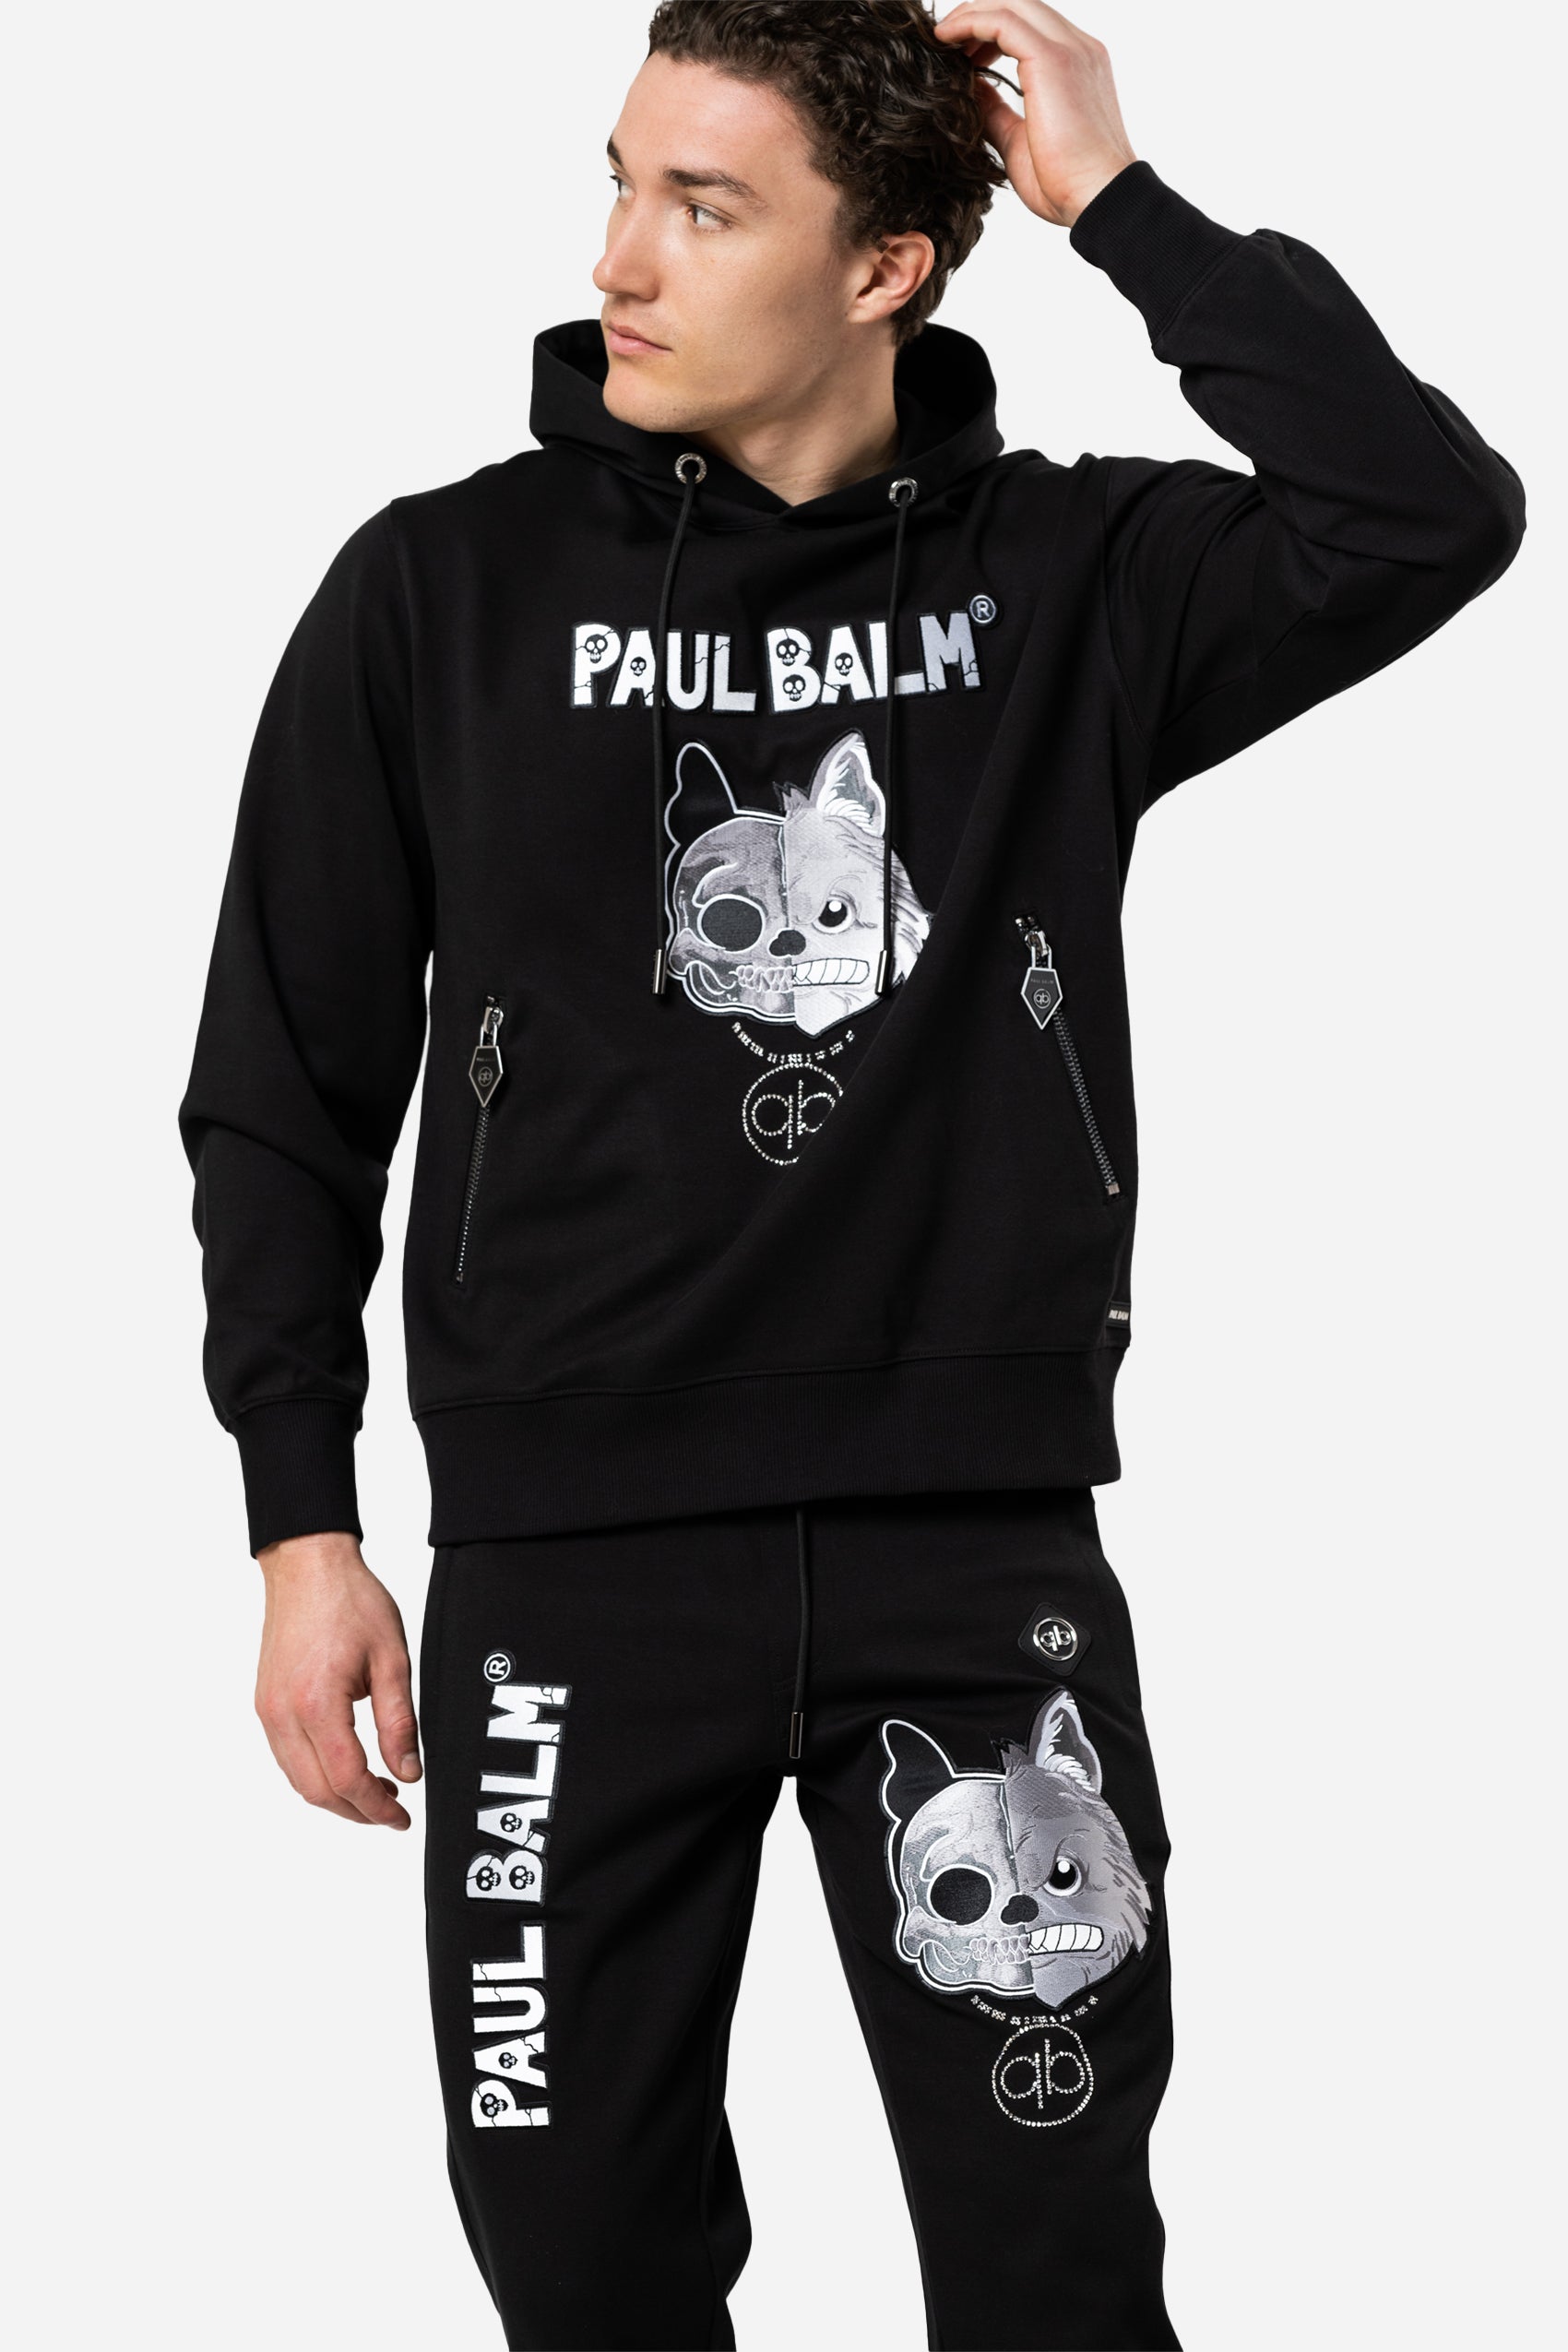 Paul Balm:  Scull Embroidery Hoodie - Limited to 300